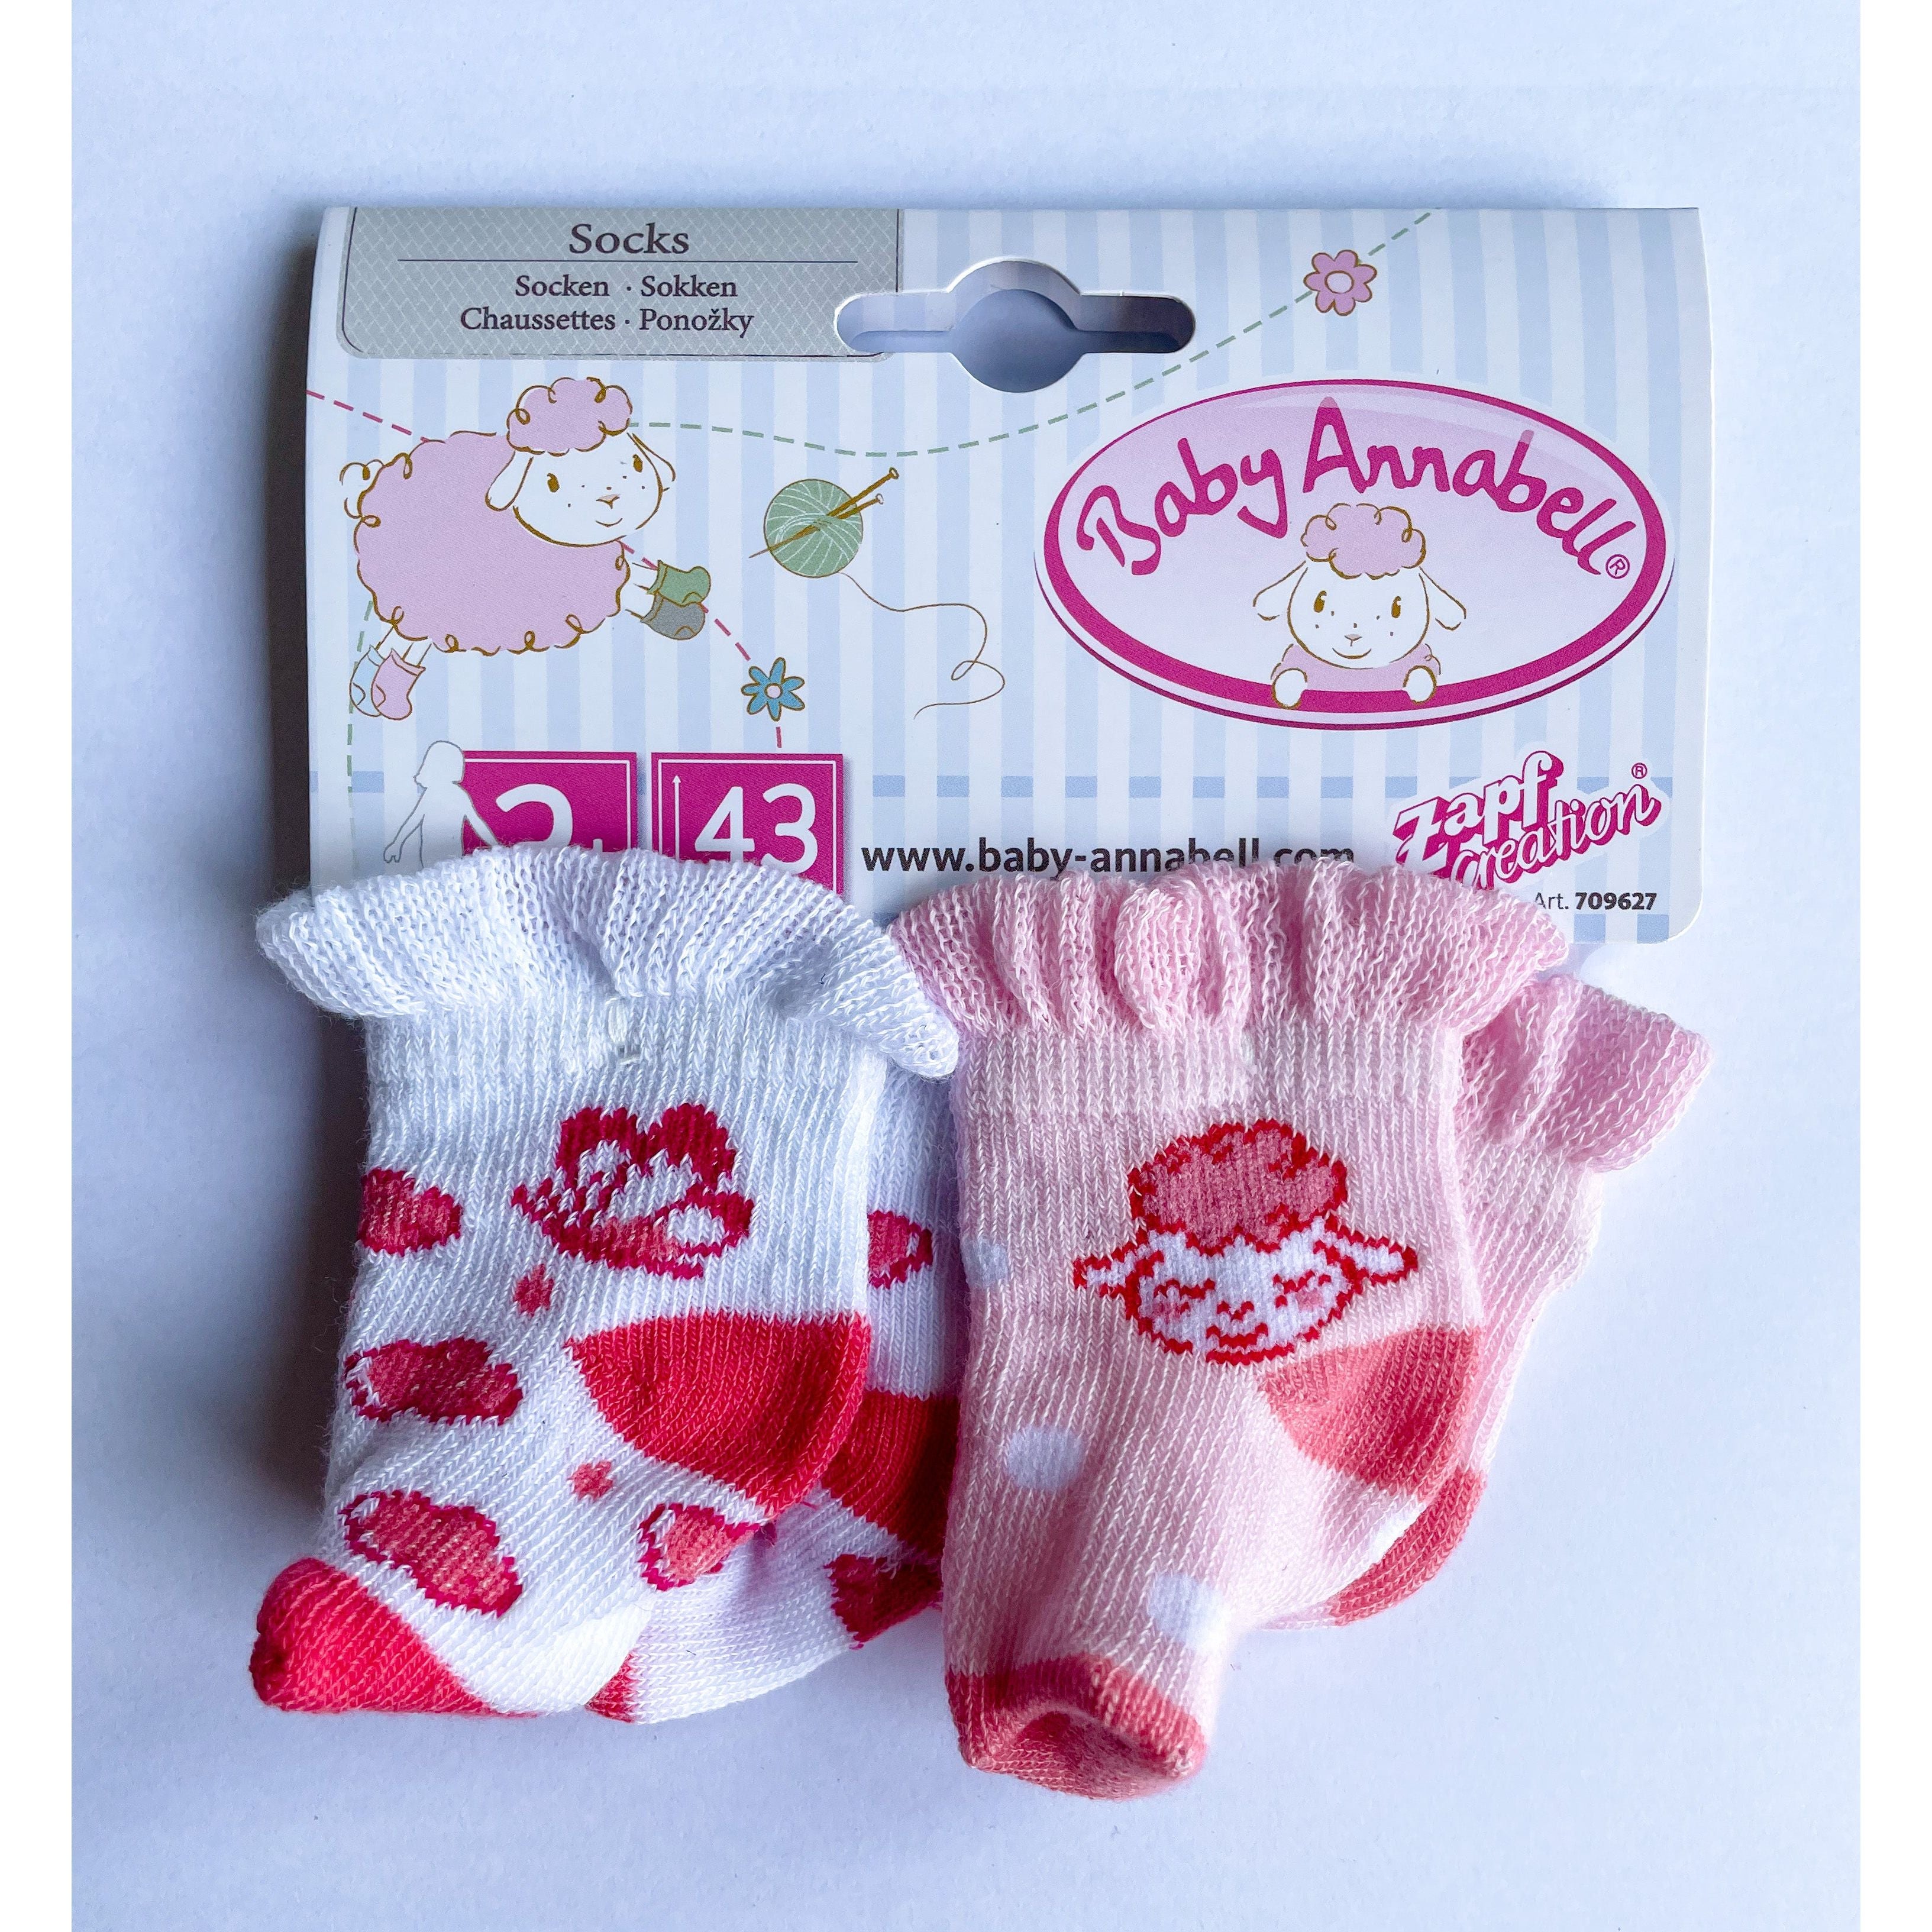 Baby Annabell Socks 2-Pack - Pink & White Baby Annabell